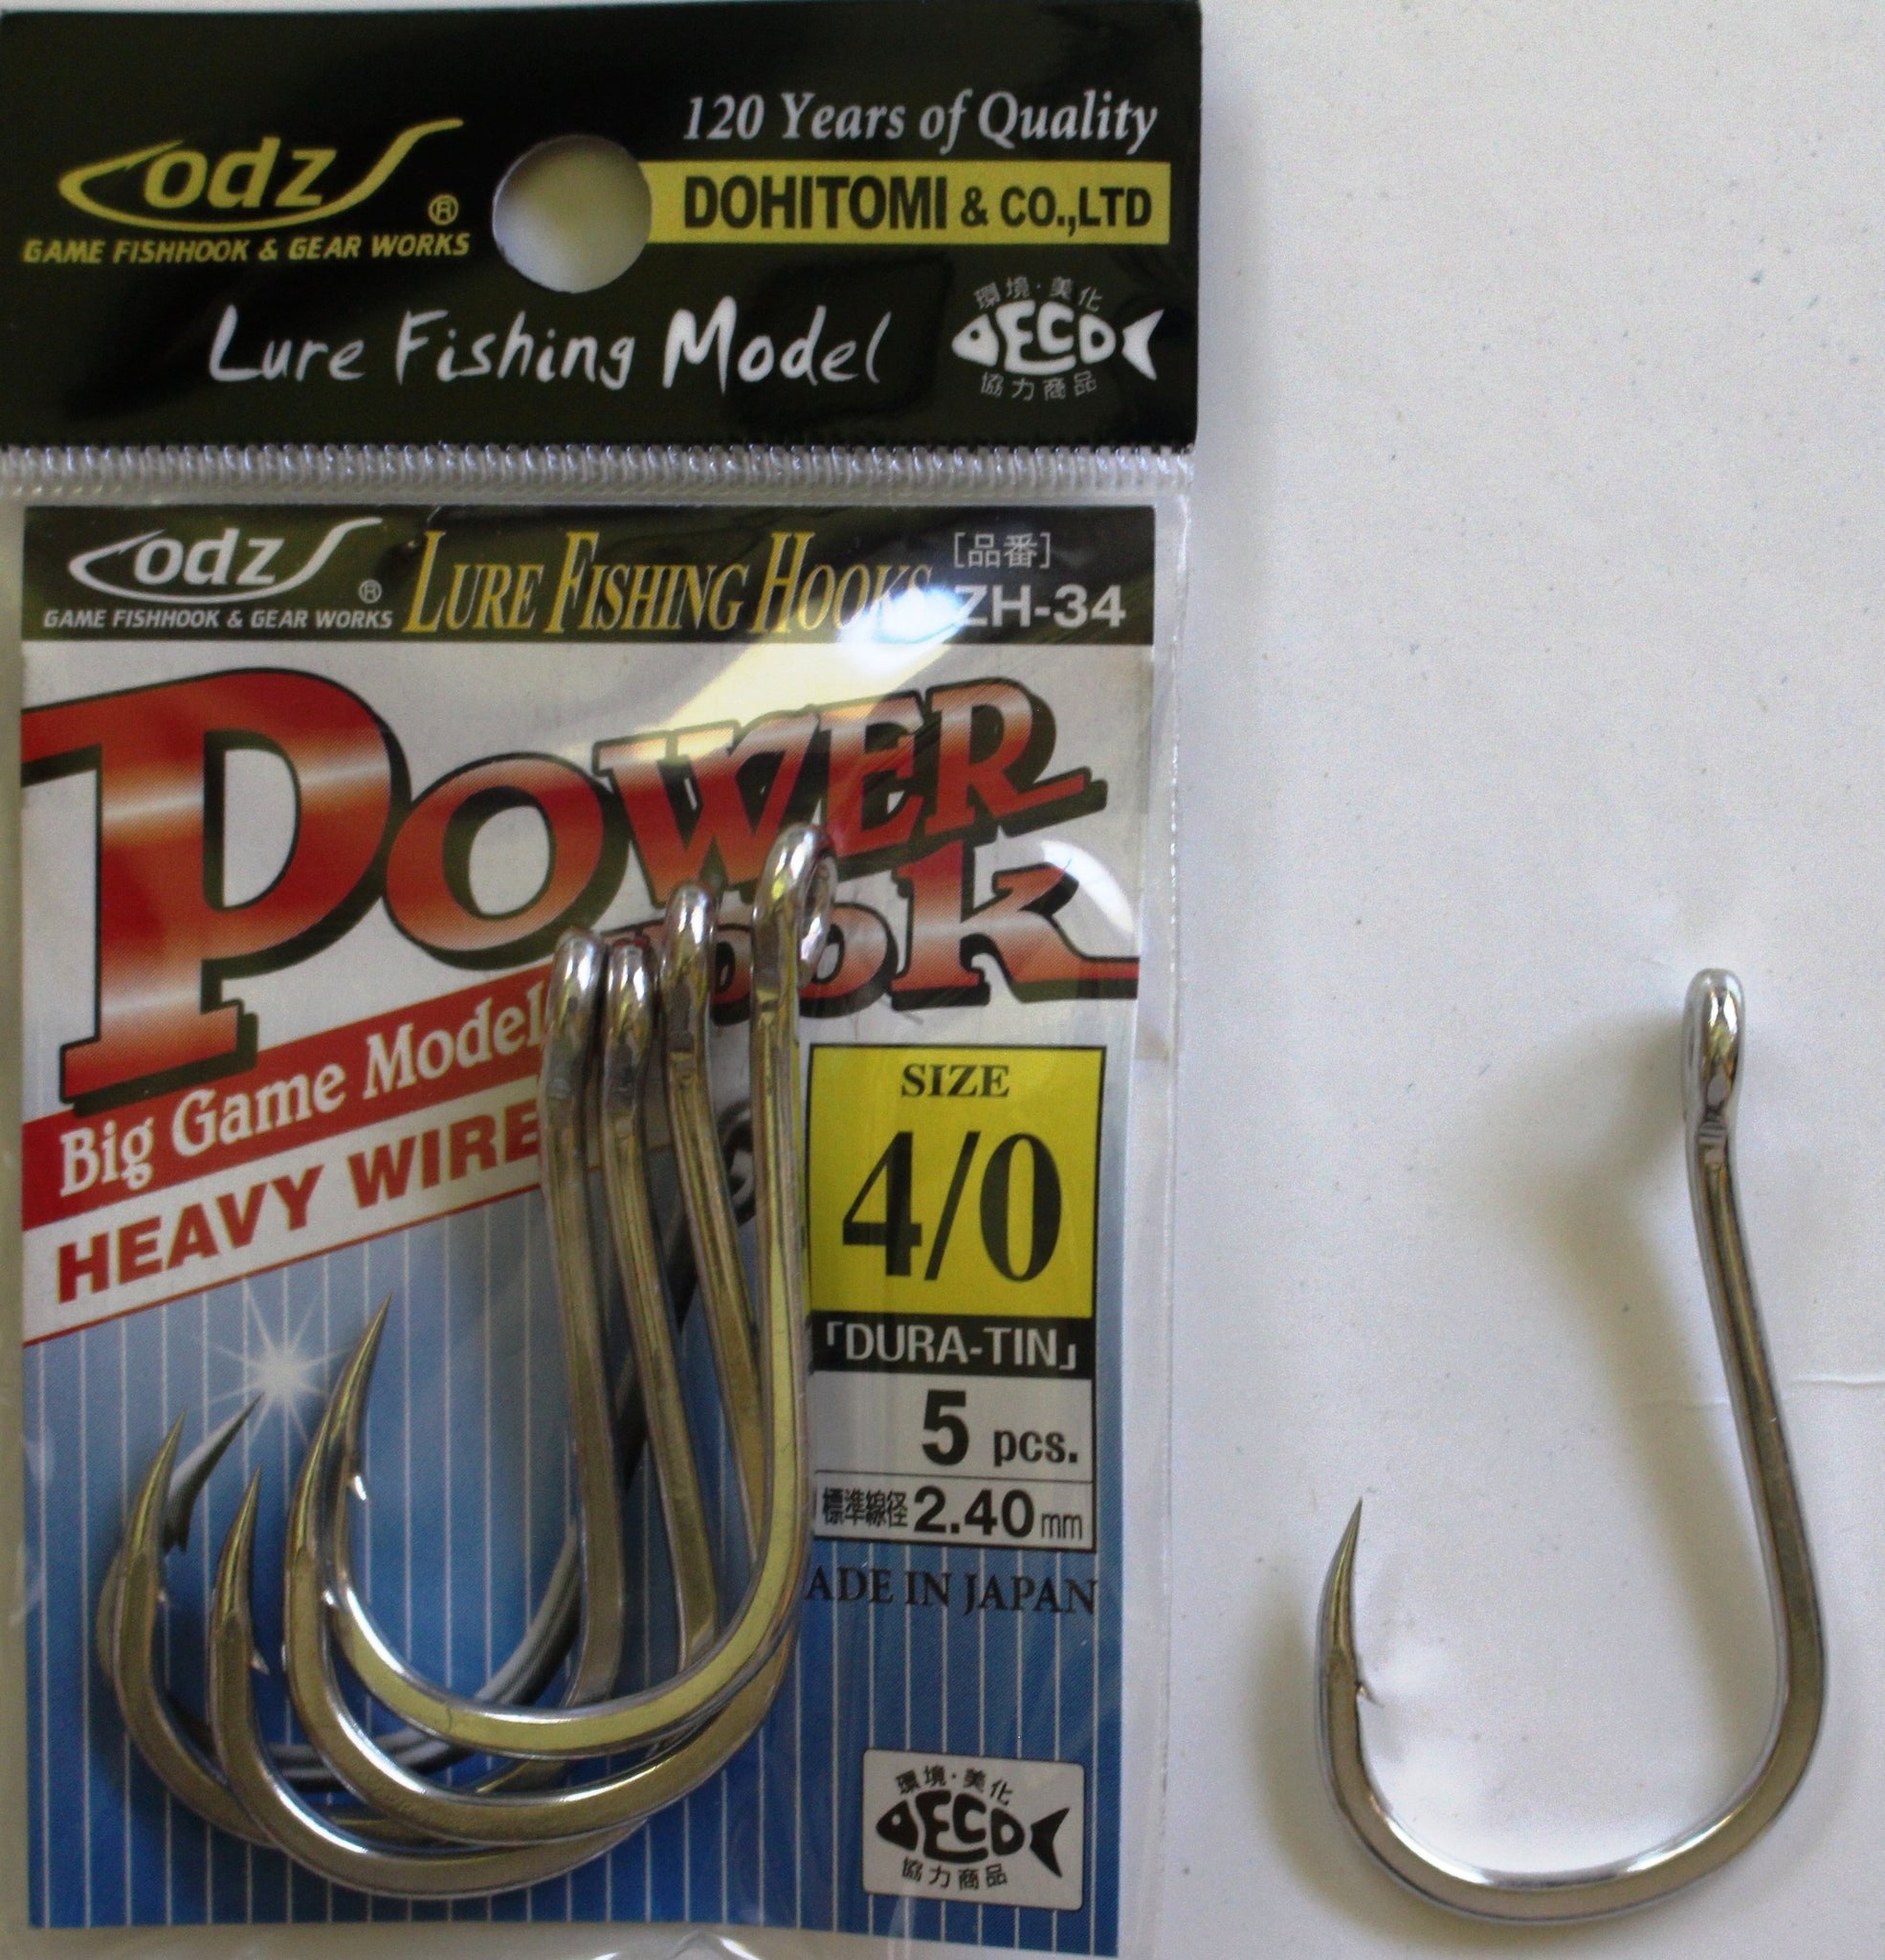 Power Assist Hook by Dohitomi & Co., Ltd. 4/0-5 Pack